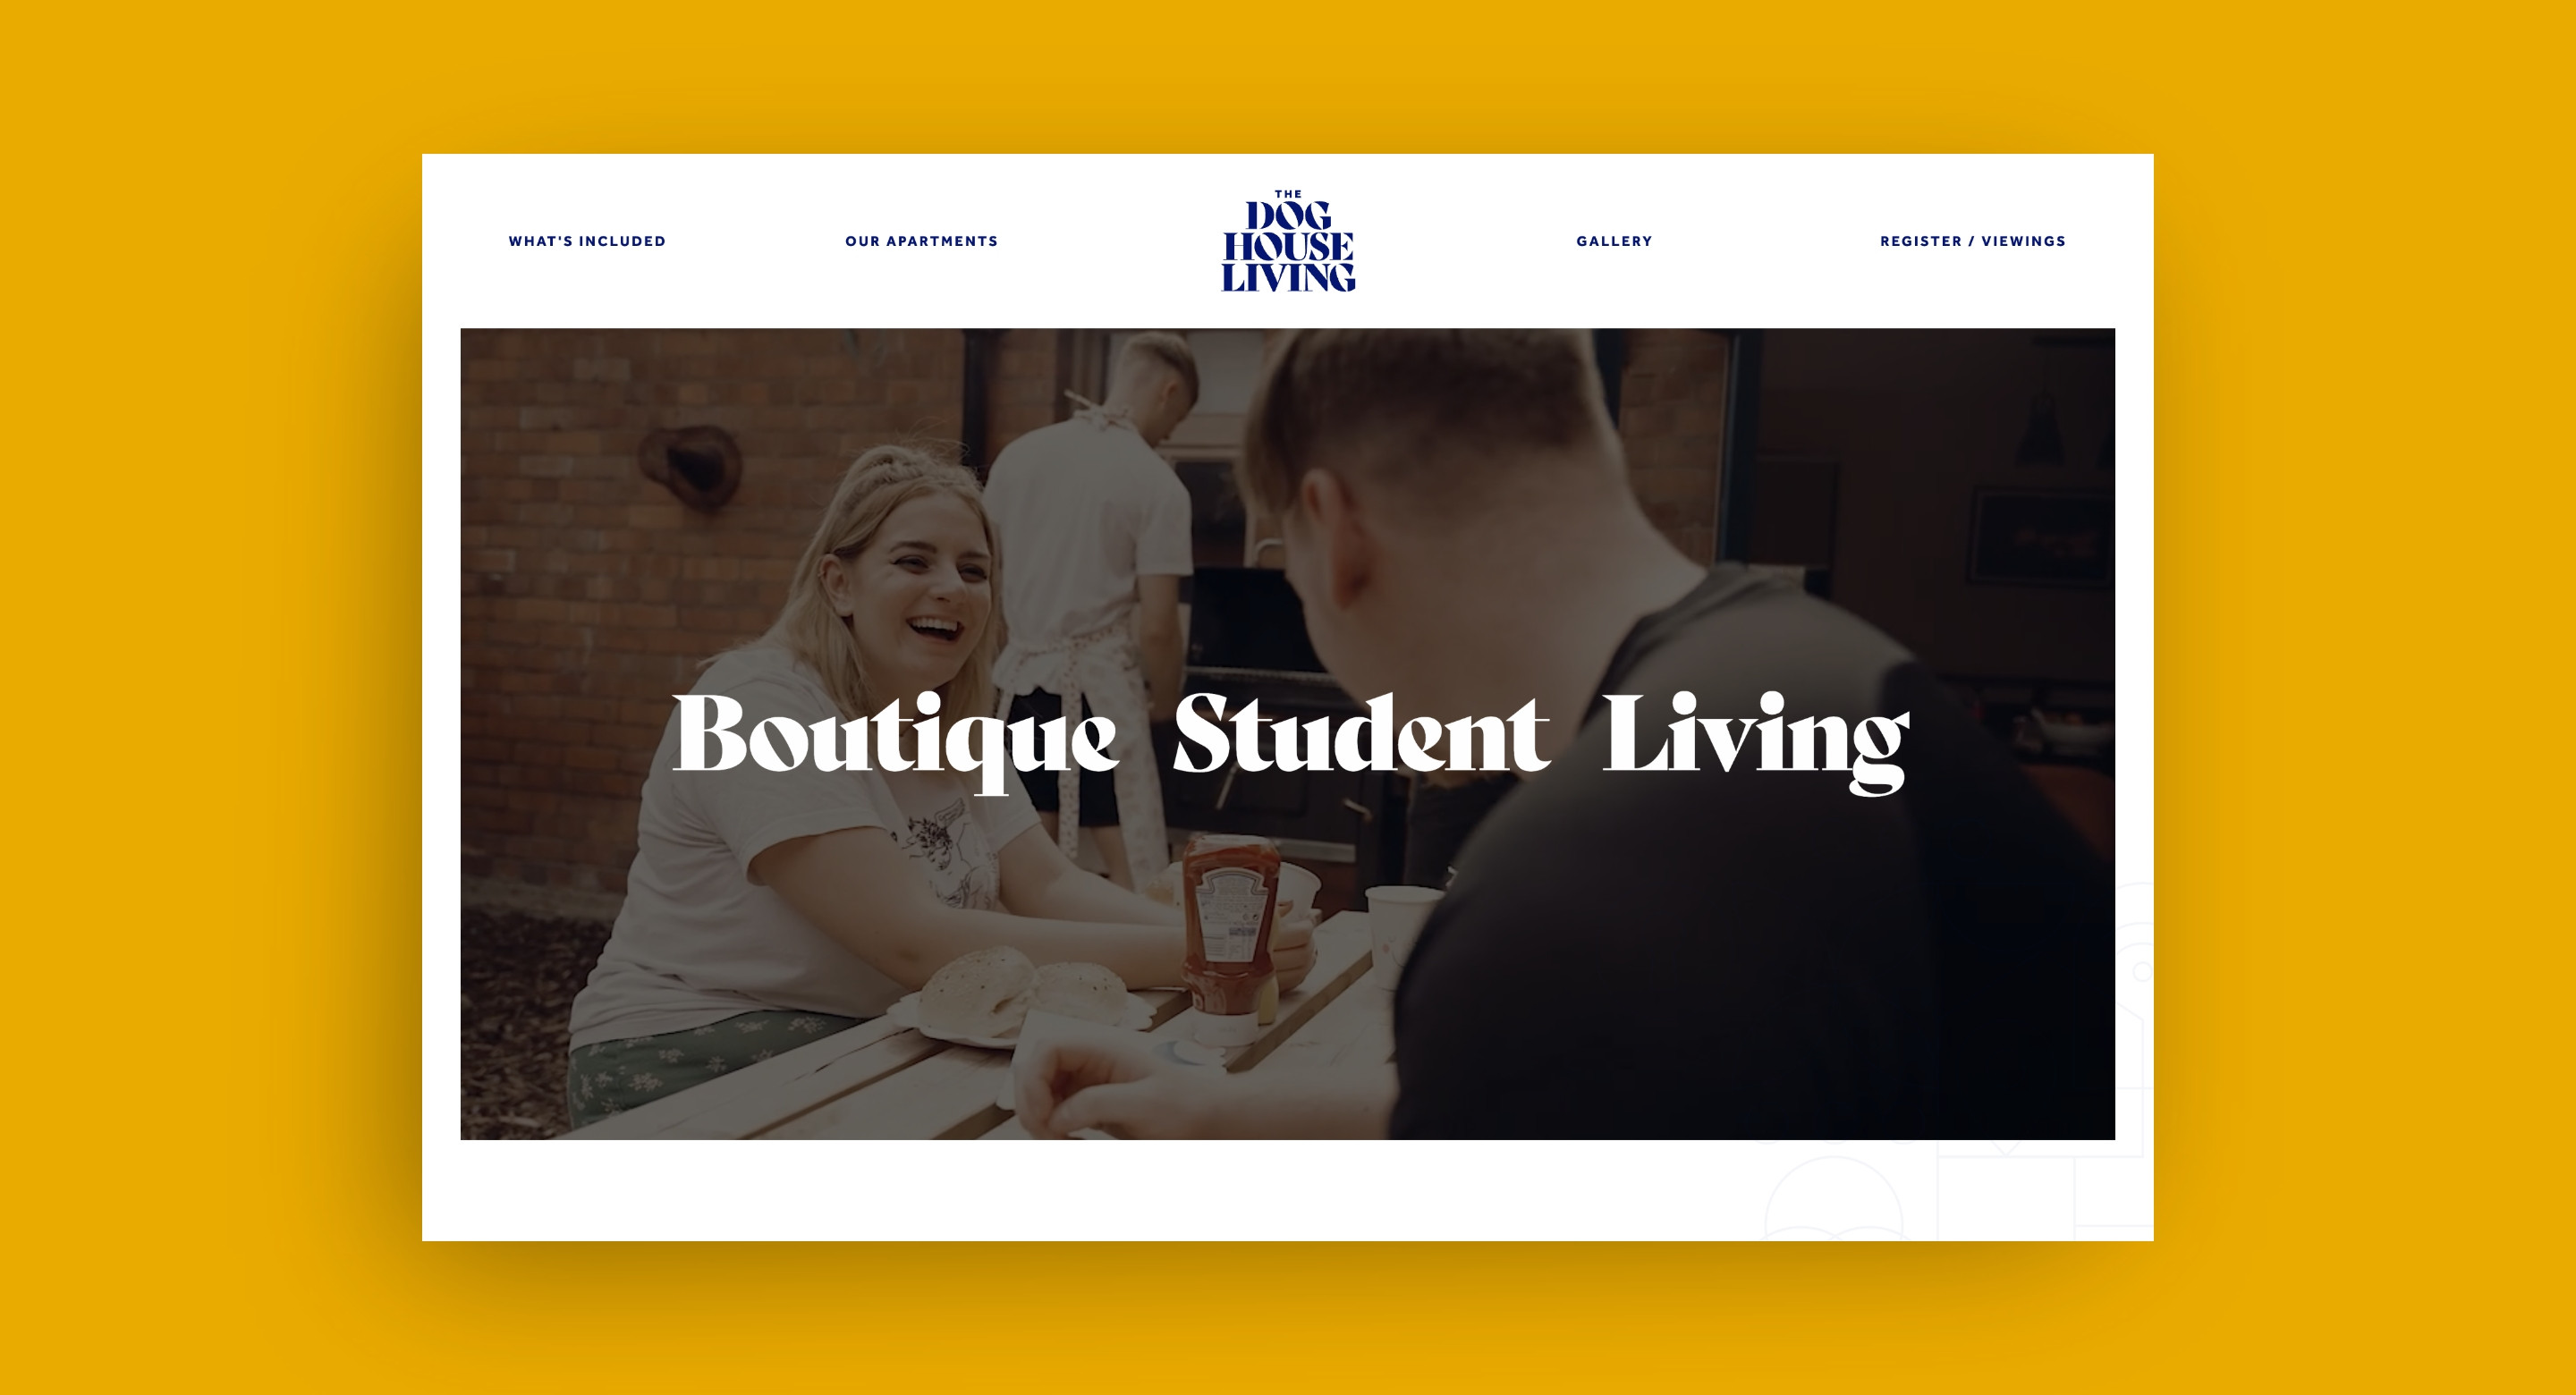 The Dog House Luxury Student Living website design by Root Studio